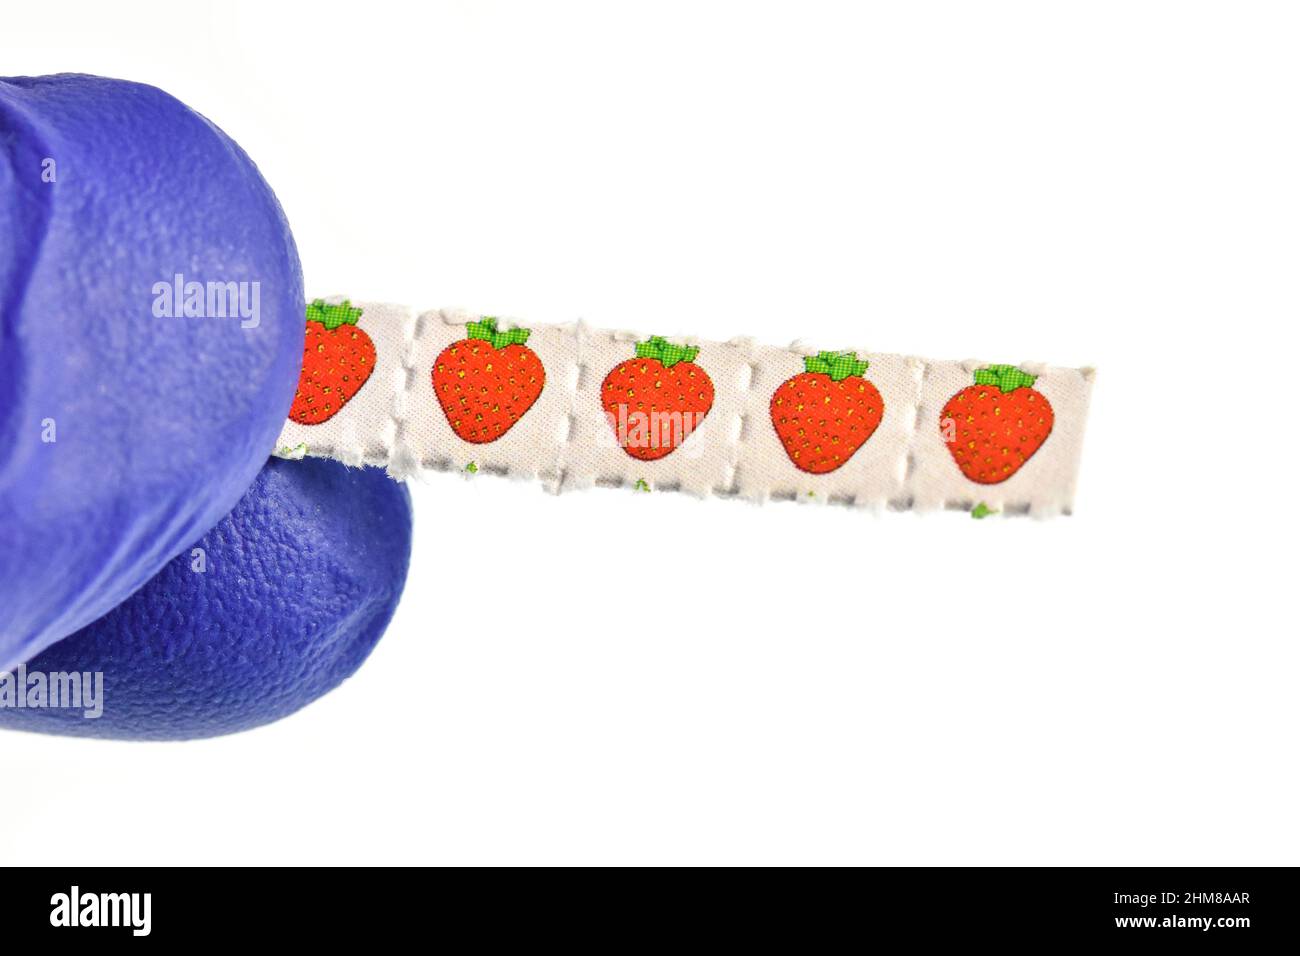 Strawberry trips-Blotting paper impregnated with the drug L.S.D.- Lysergic acid diethylamide. Stock Photo